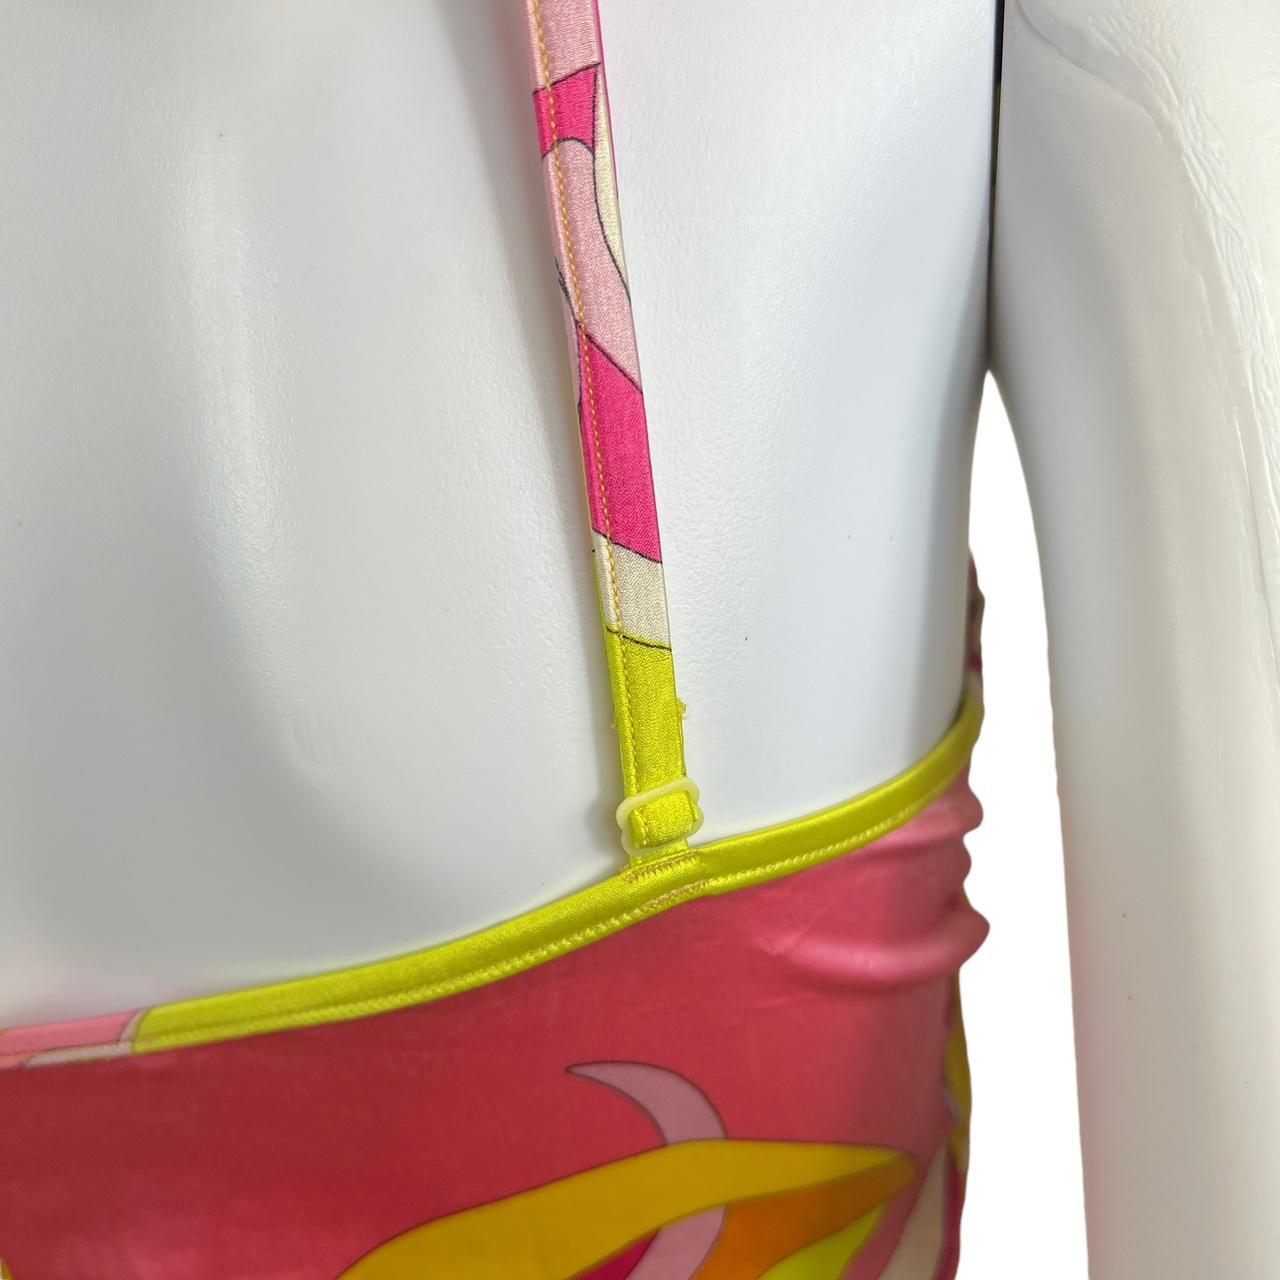 Emilio Pucci Women's Pink and Yellow Vest (5)